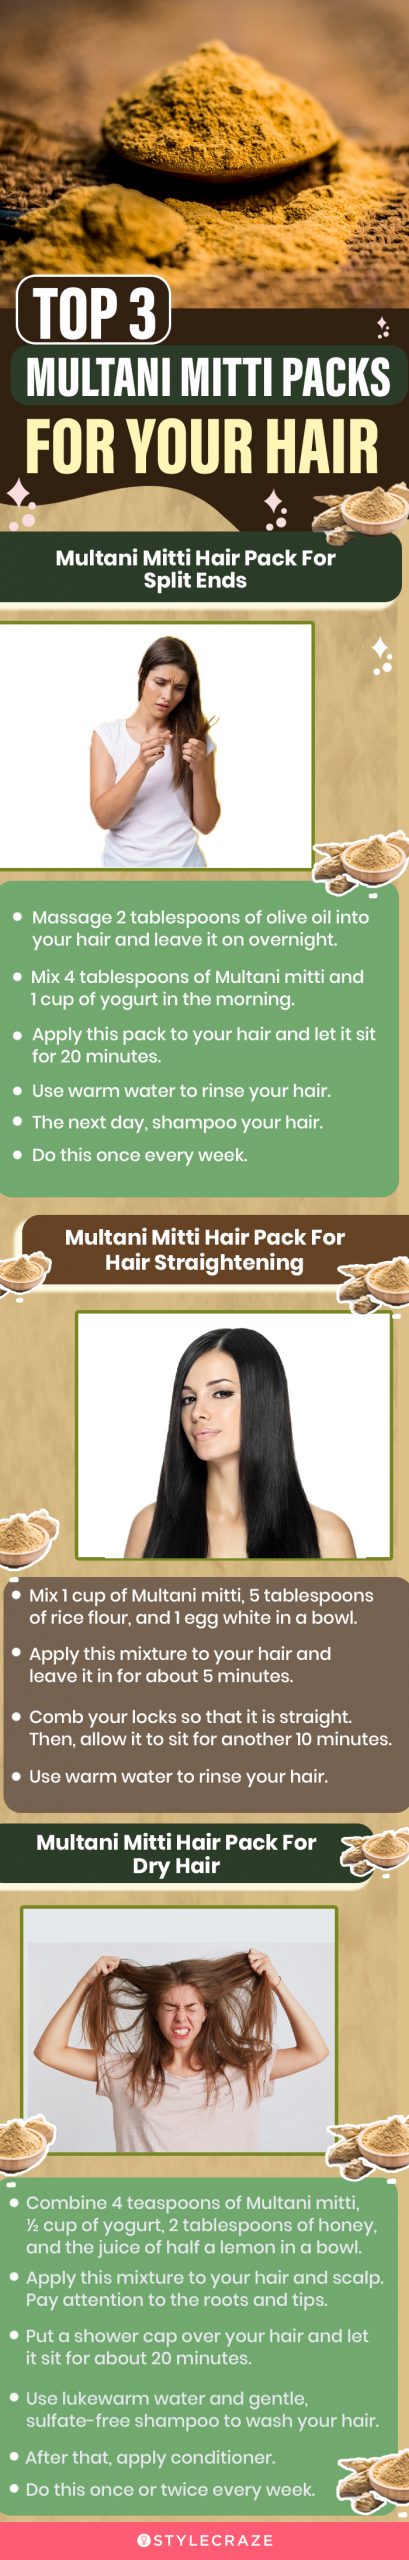 top 3 multani mitti packs for your hair (infographic)